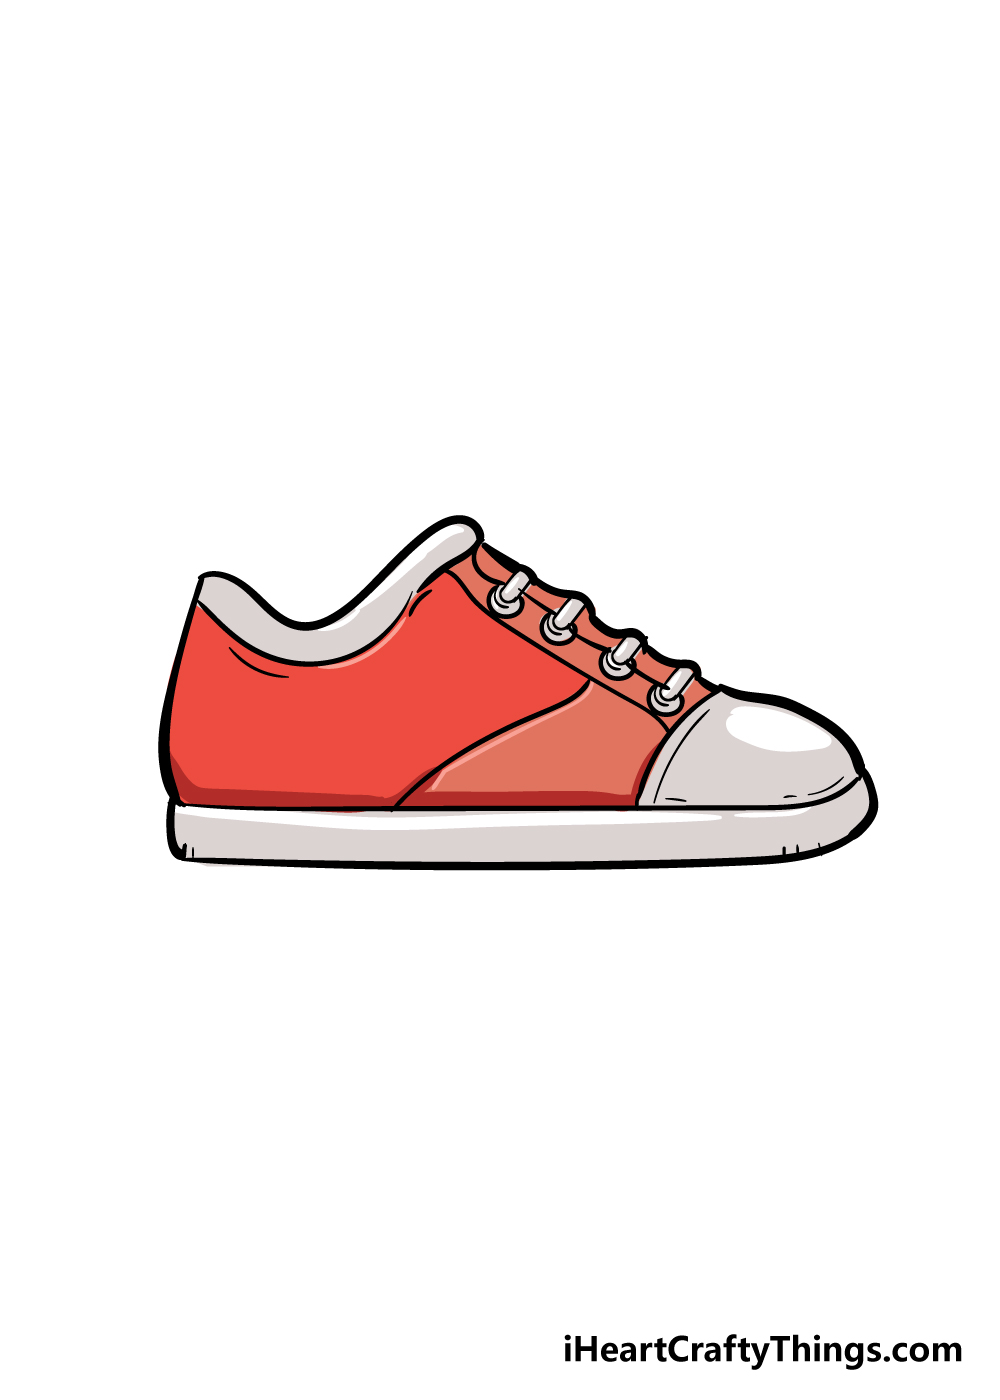 Streng Ripples biografi Shoe Drawing - How To Draw A Shoe Step By Step